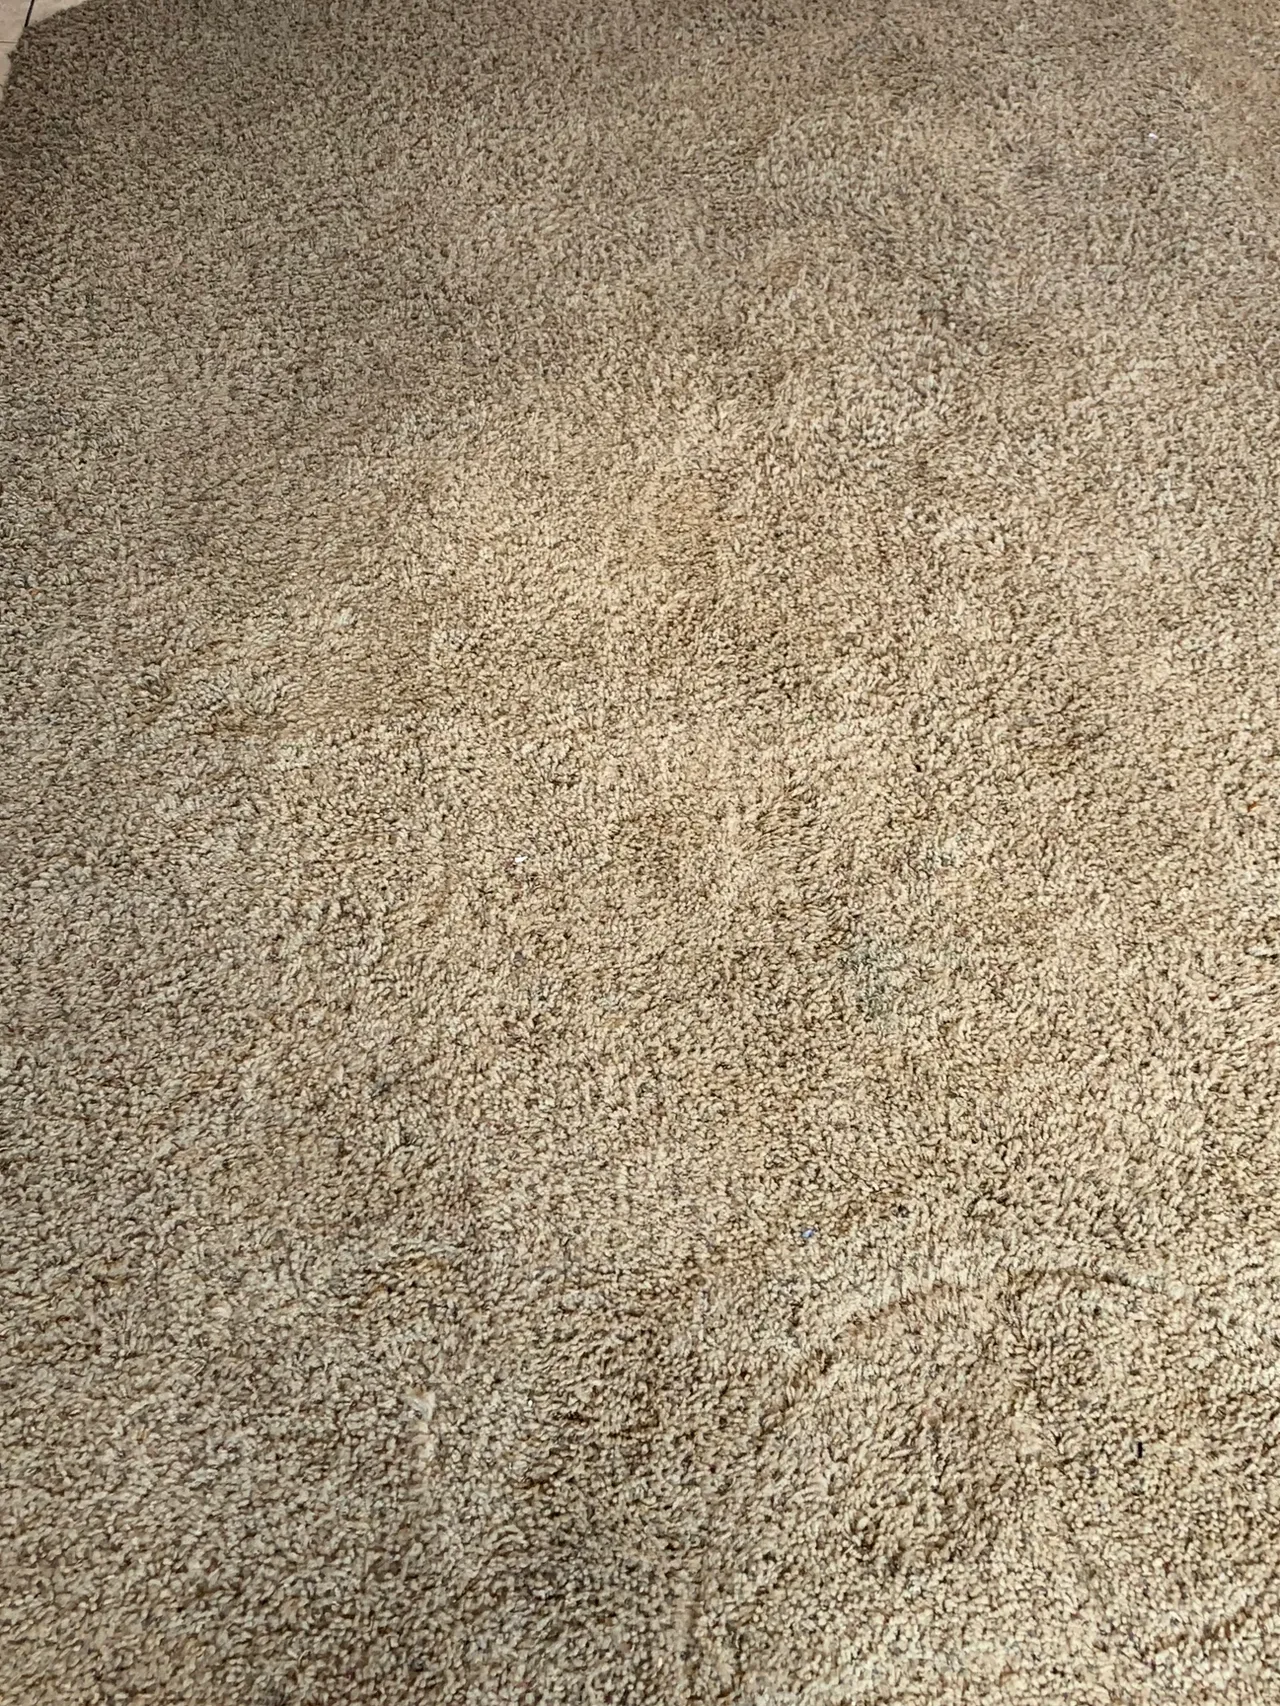 Residential Carpet cleaning services in Salt Lake City and Stain Removal in Riverton and Salt lake city